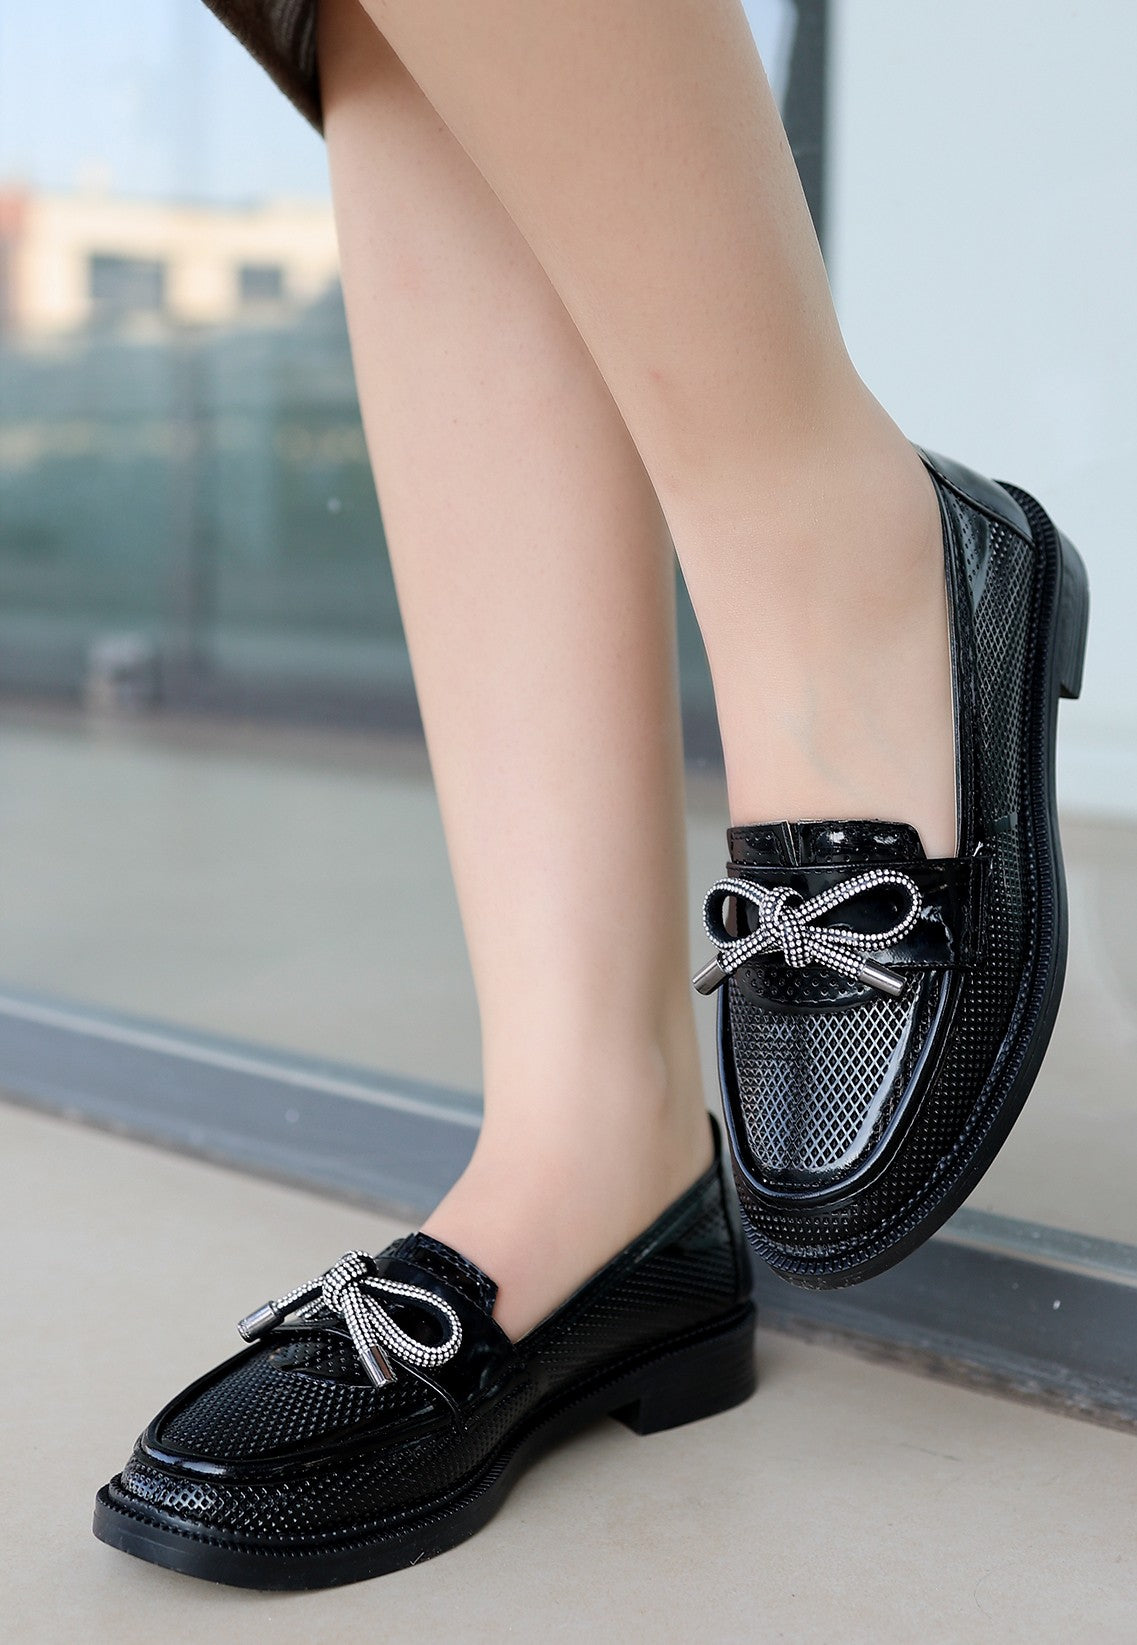 Women's Chay Black Patent Leather Ballerina Shoes - STREETMODE™